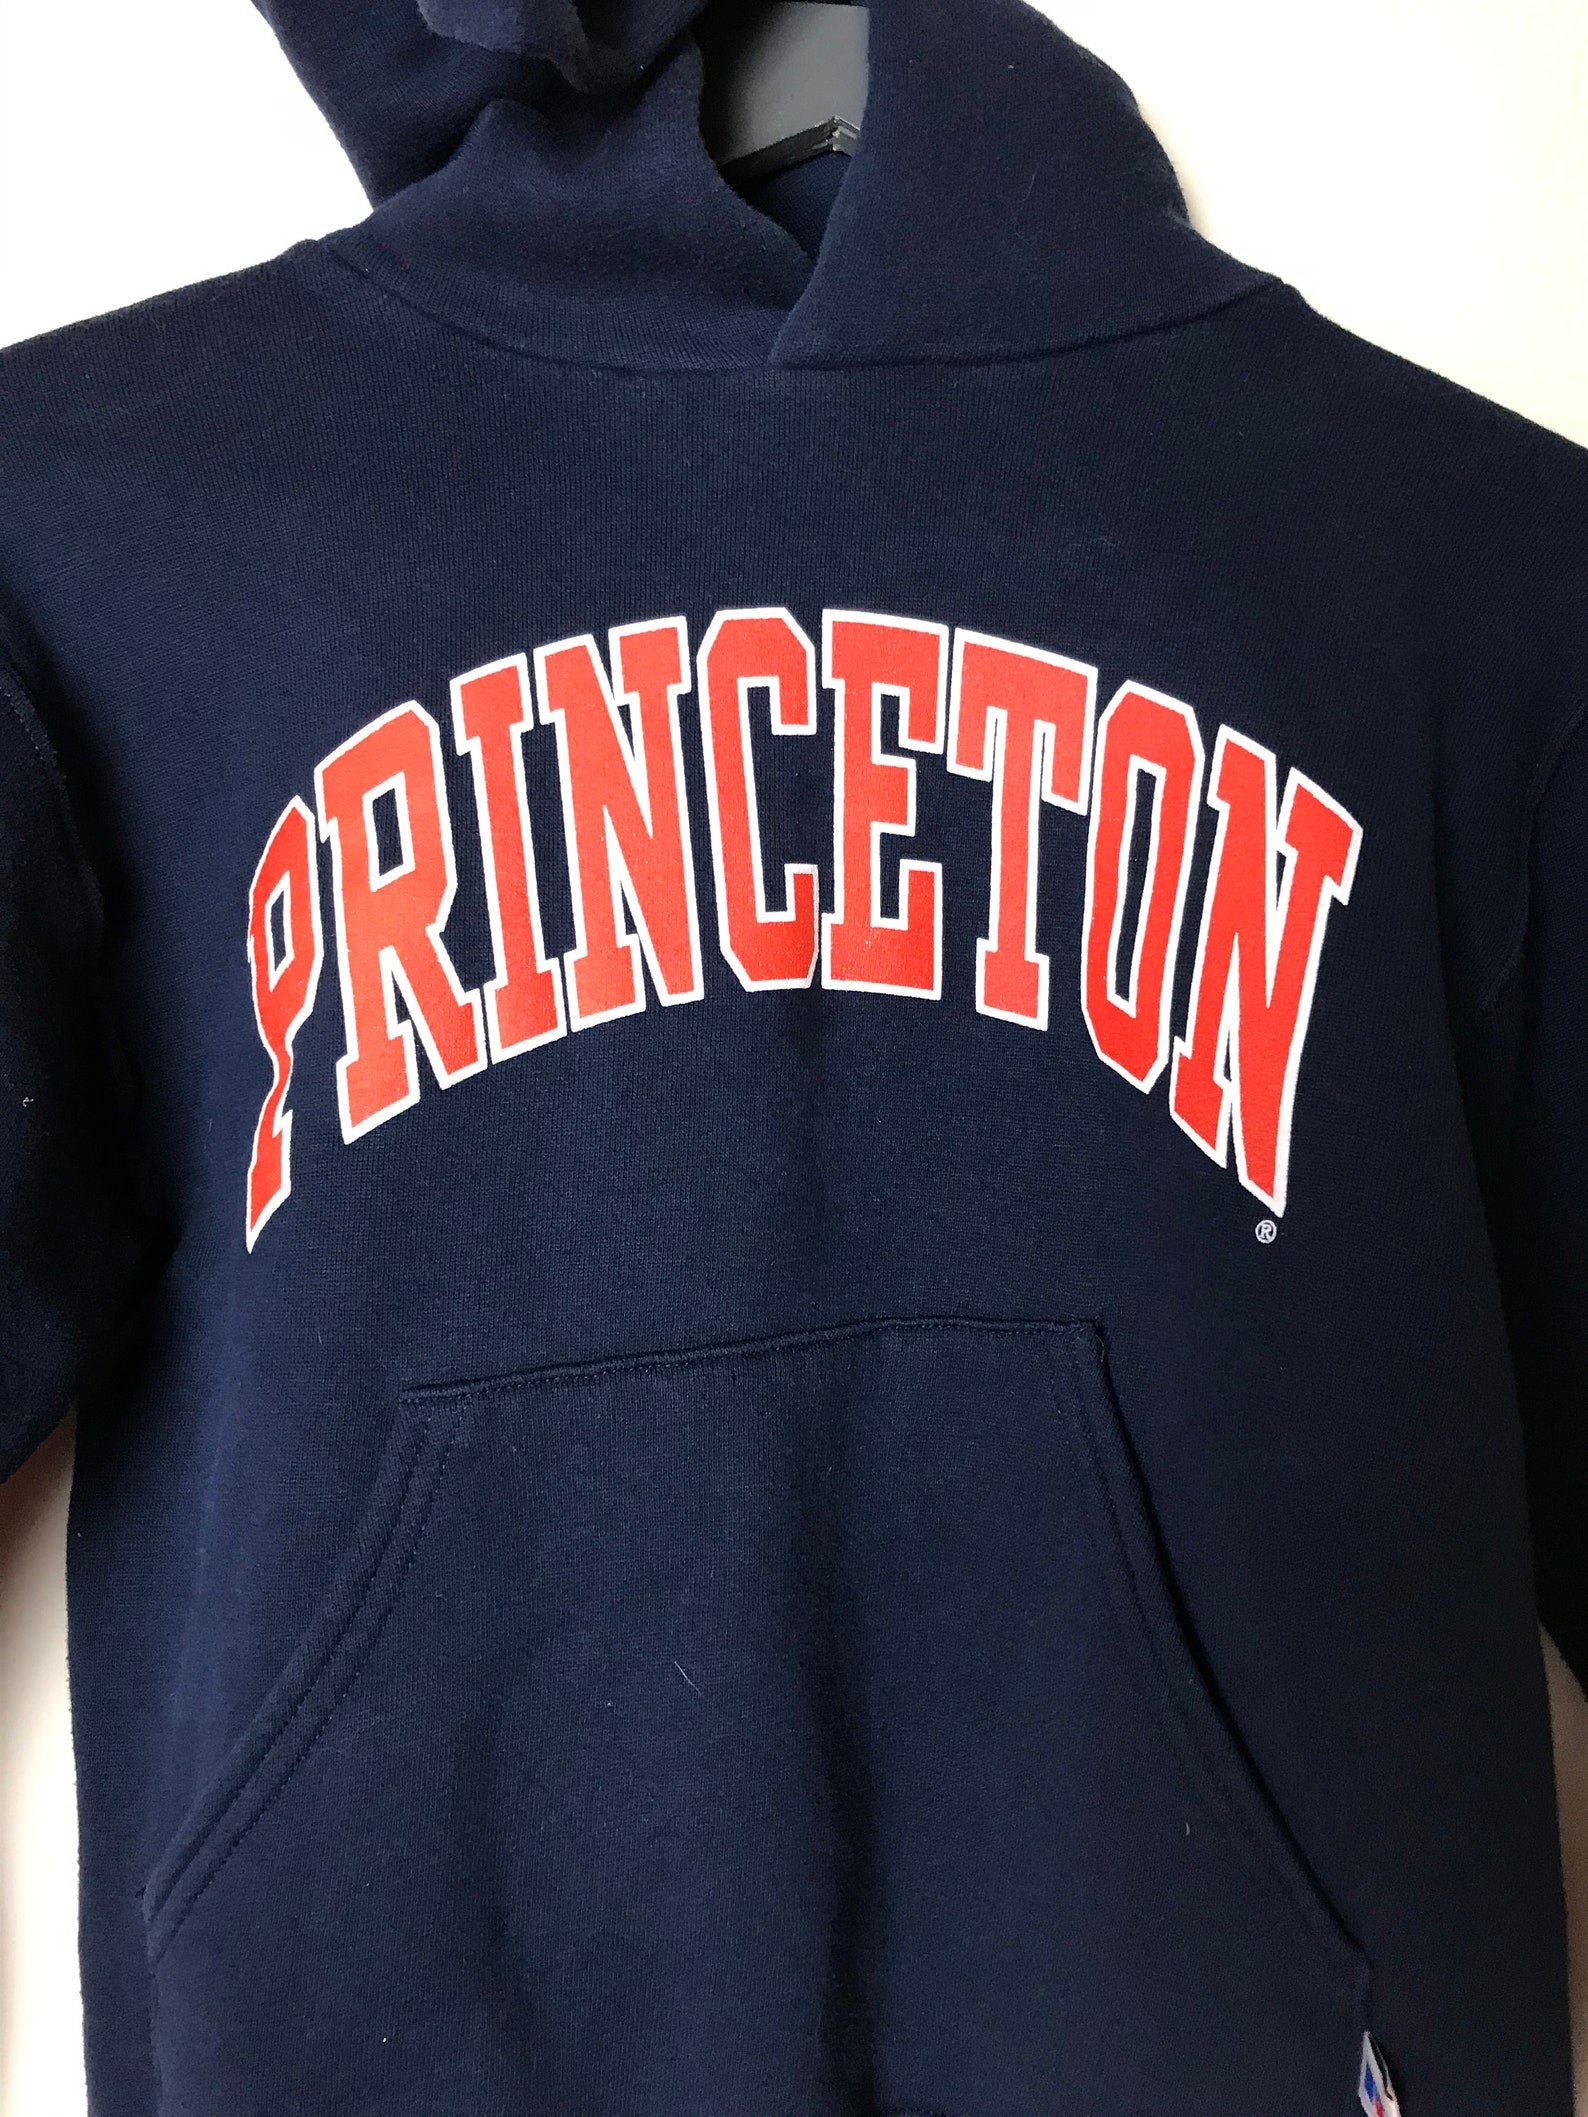 Youth Princeton University Hoodie in Navy Youth S - Etsy